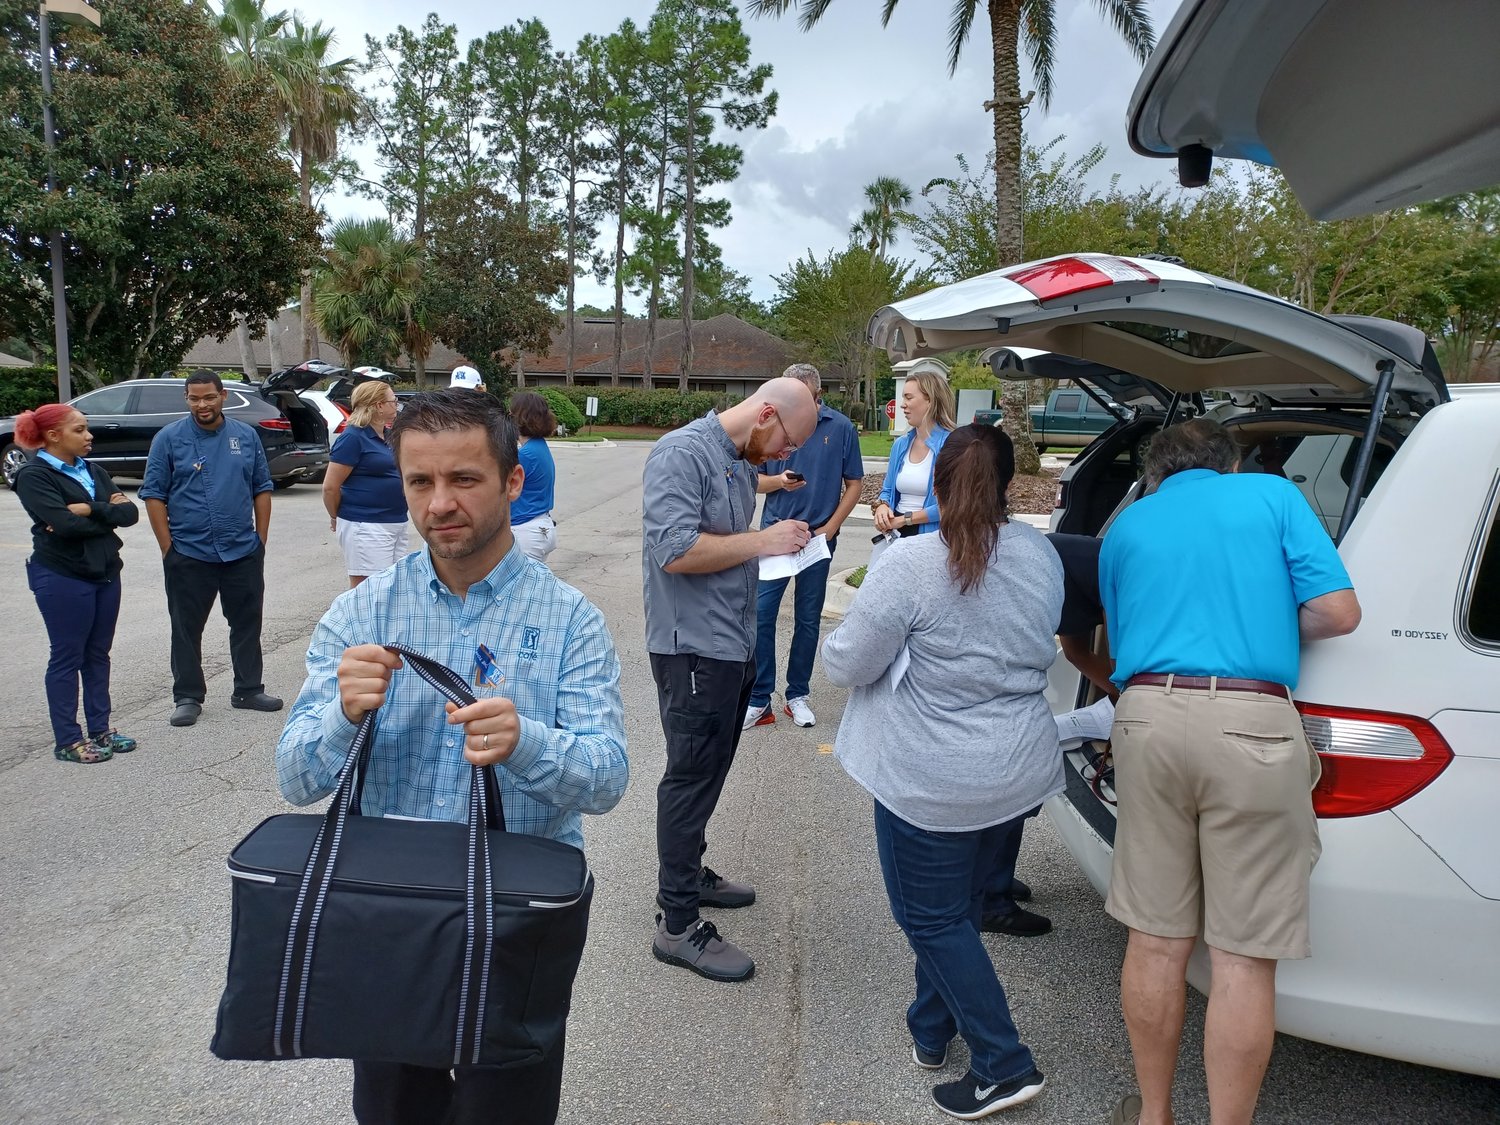 Volunteers pack automobiles with meals created for Jay Fund families by PGA TOUR Chef Eric Butcher and his team. The meals were delivered by volunteers to the families on Sept. 17.